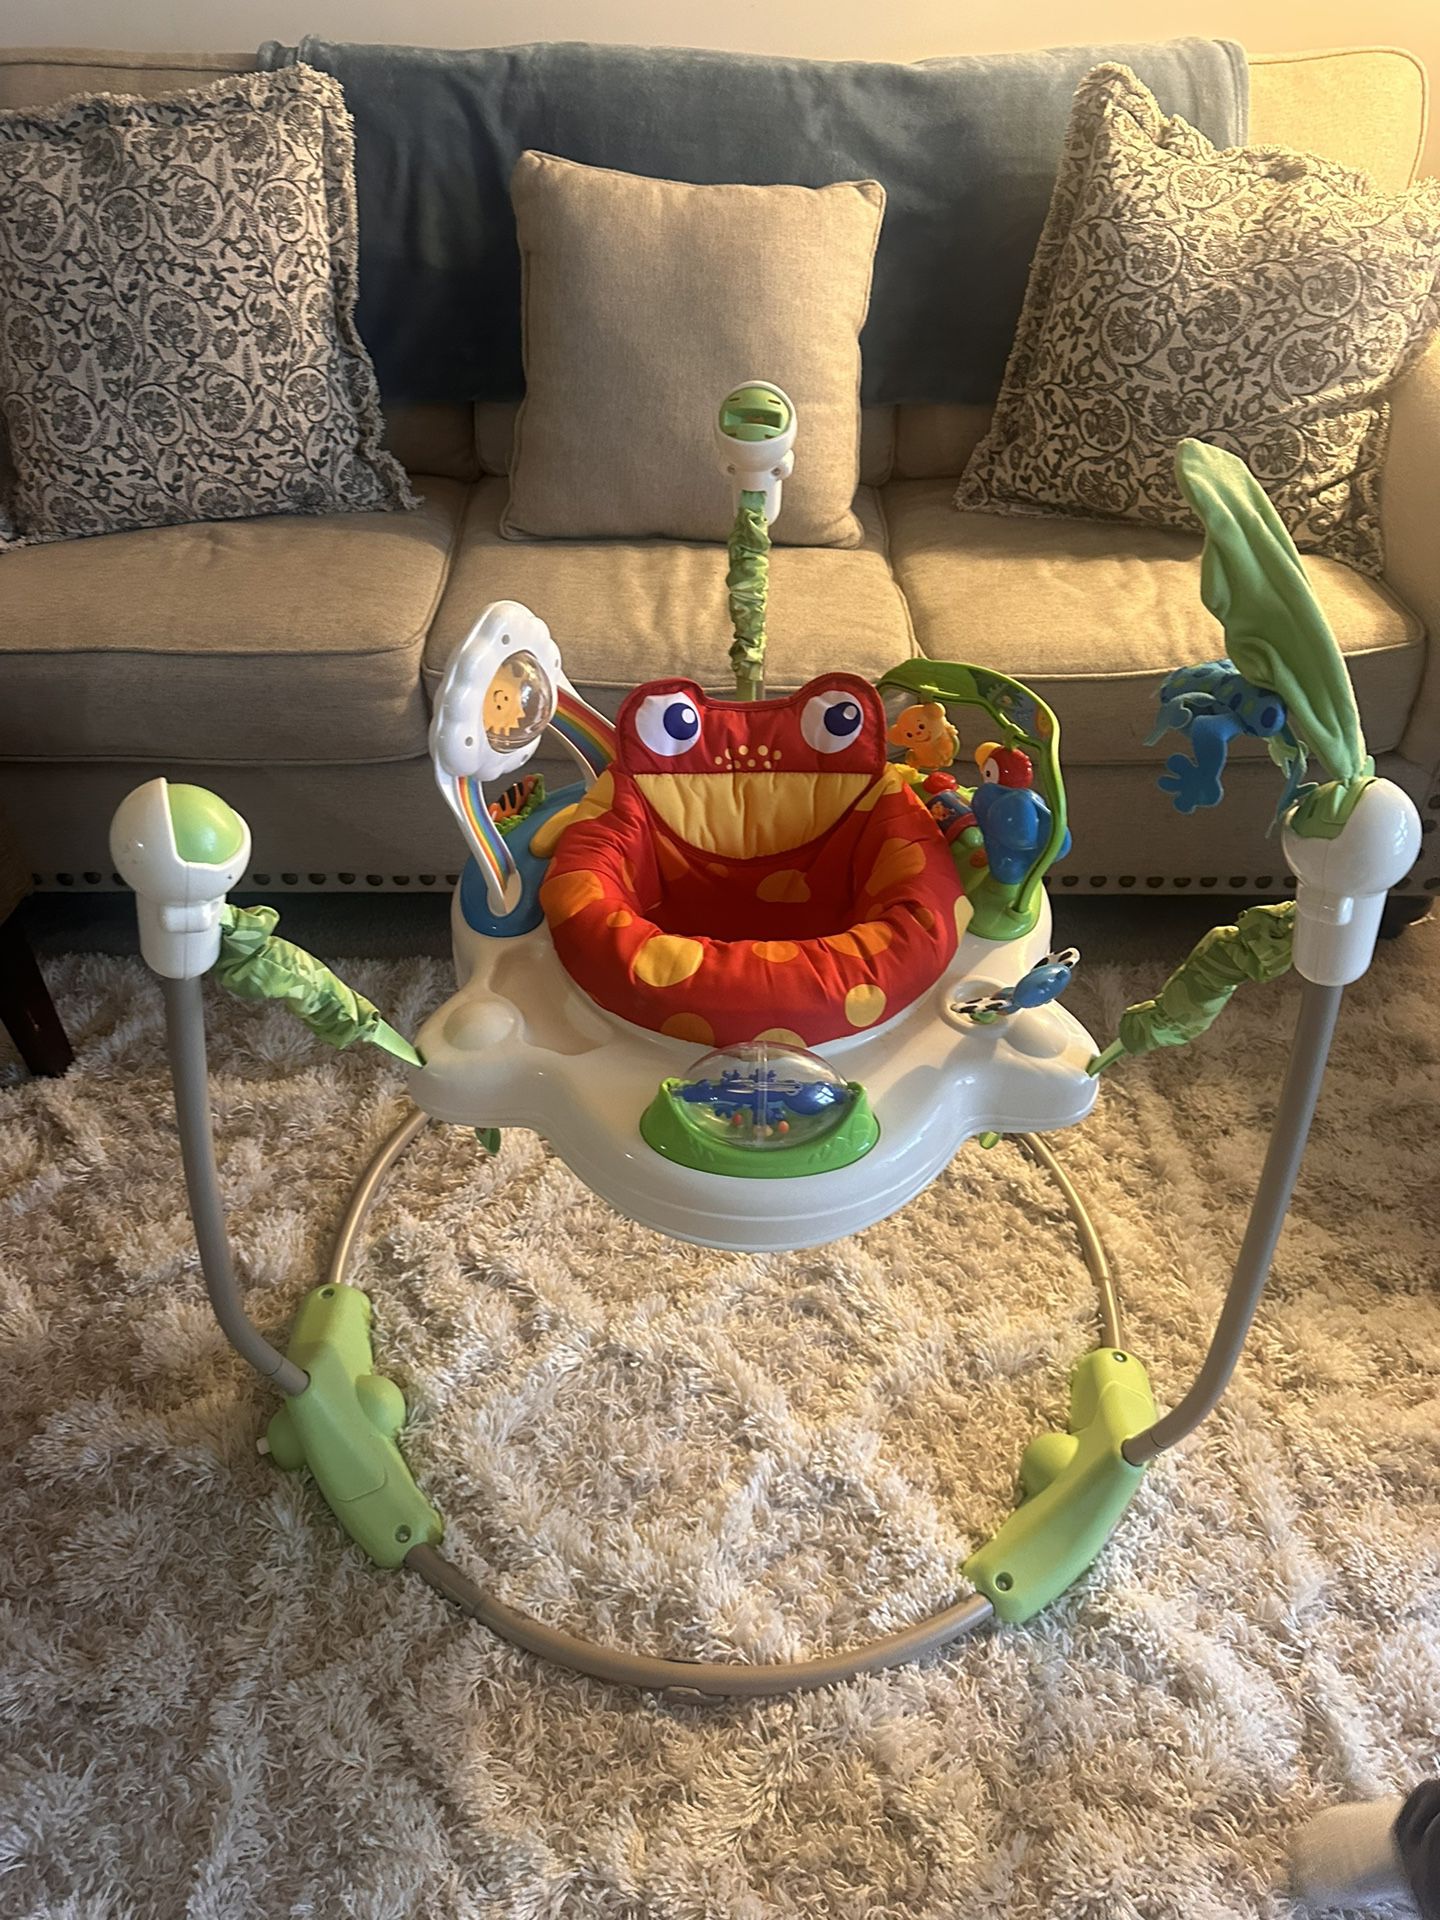 Fisher Price Rainforest Jumperoo Baby Bouncer Entertainer - Like new!!